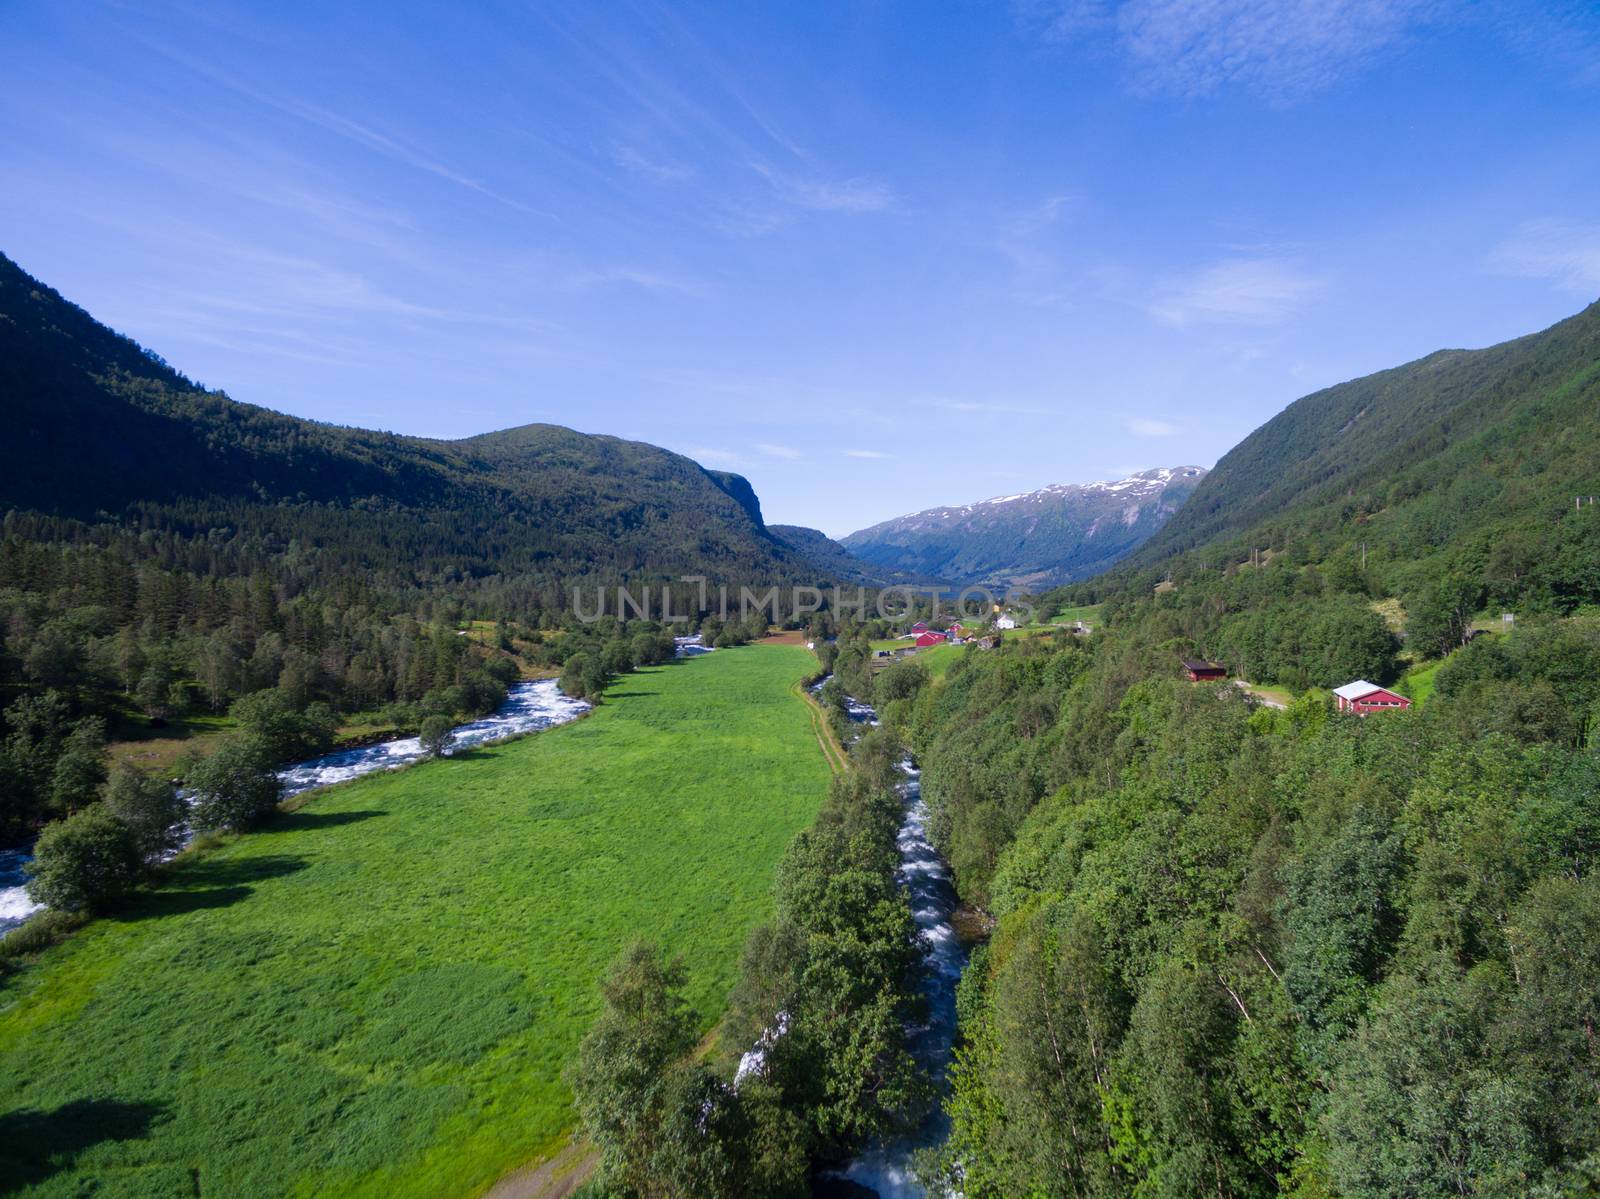 Scenic aerial view of green valley with streams in Norway